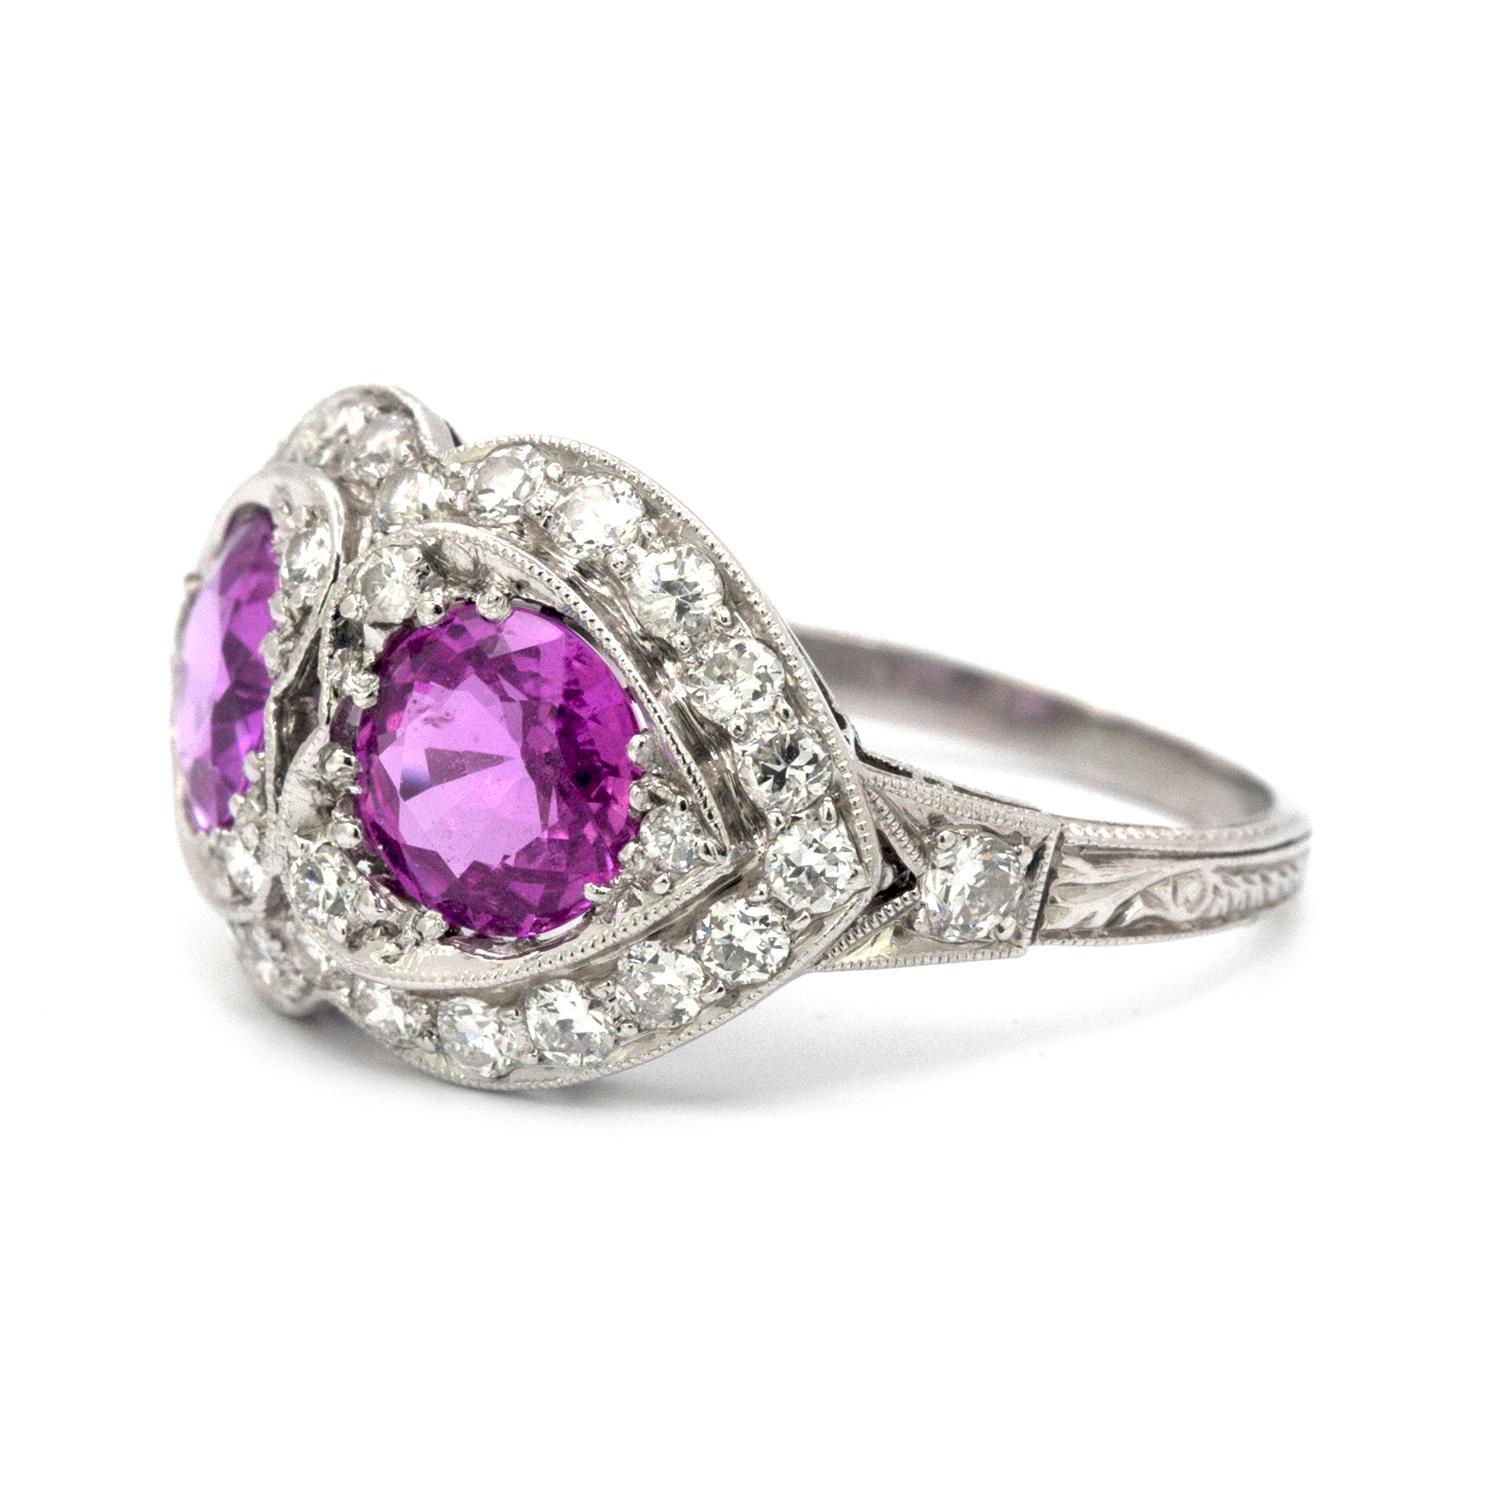 This Pink Sapphire and Diamond, Art Deco style, 18k white gold ring features two round Pink Sapphires. Each one measures 6.5 mm and have a total weight of 2.45 cts. These pink sapphires are beautifully offset by 32 rbc clean white diamonds that